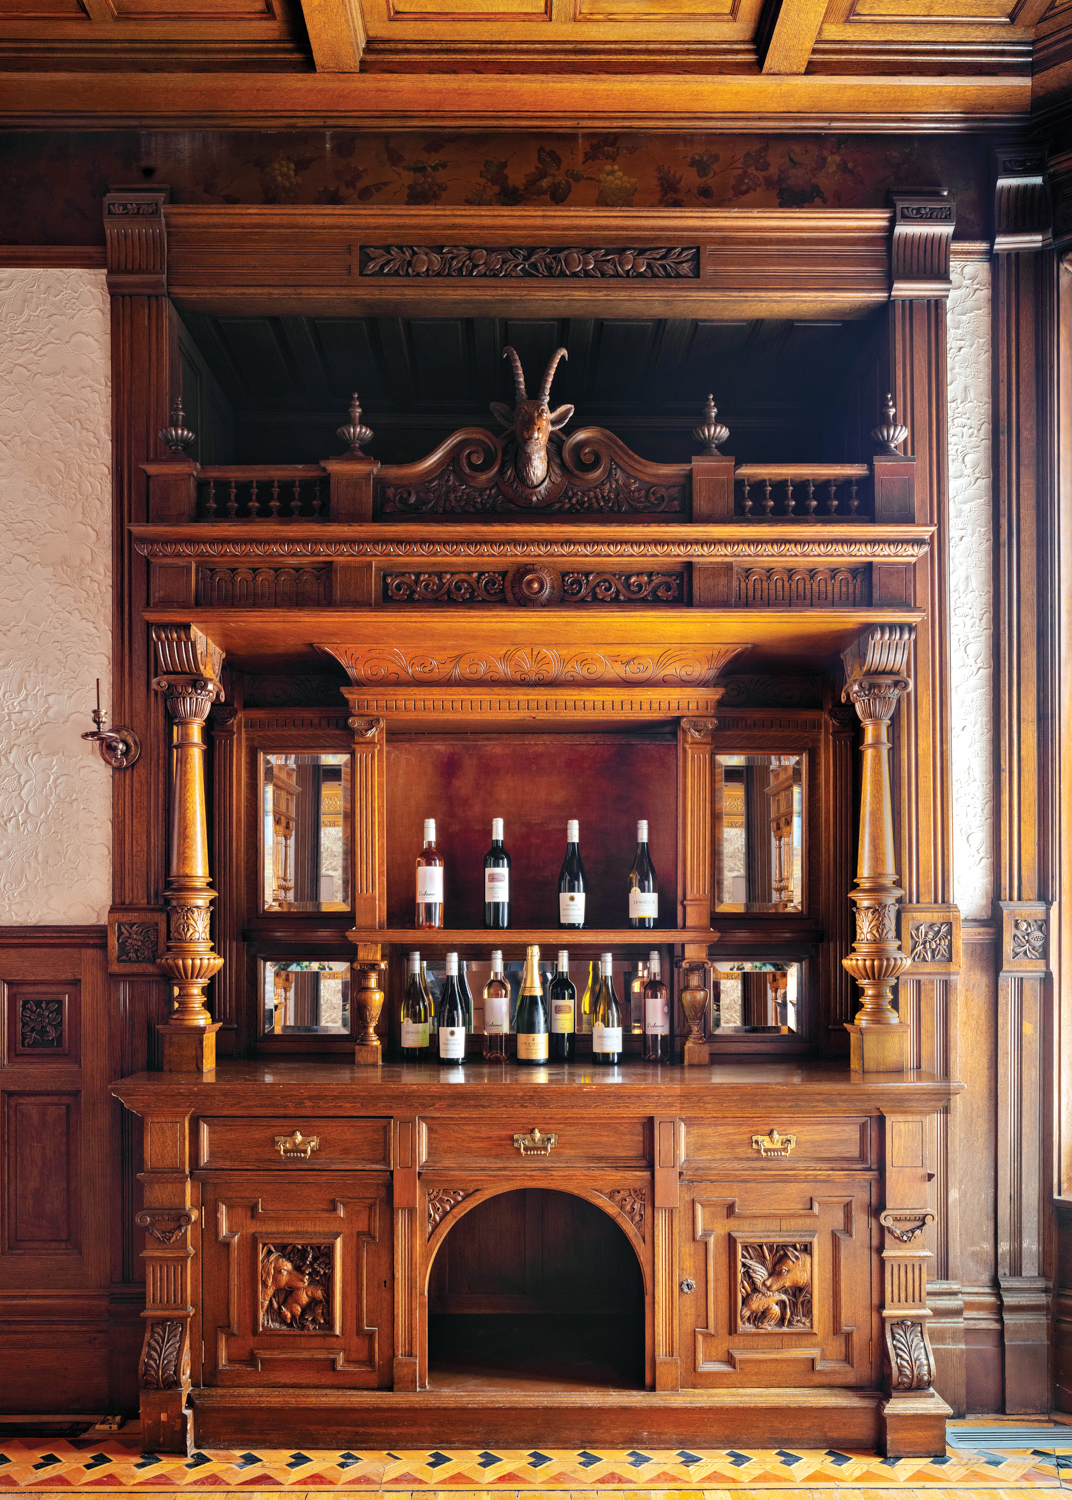 A 19th-century original carved-wood bar filled with liquor and wine bottles